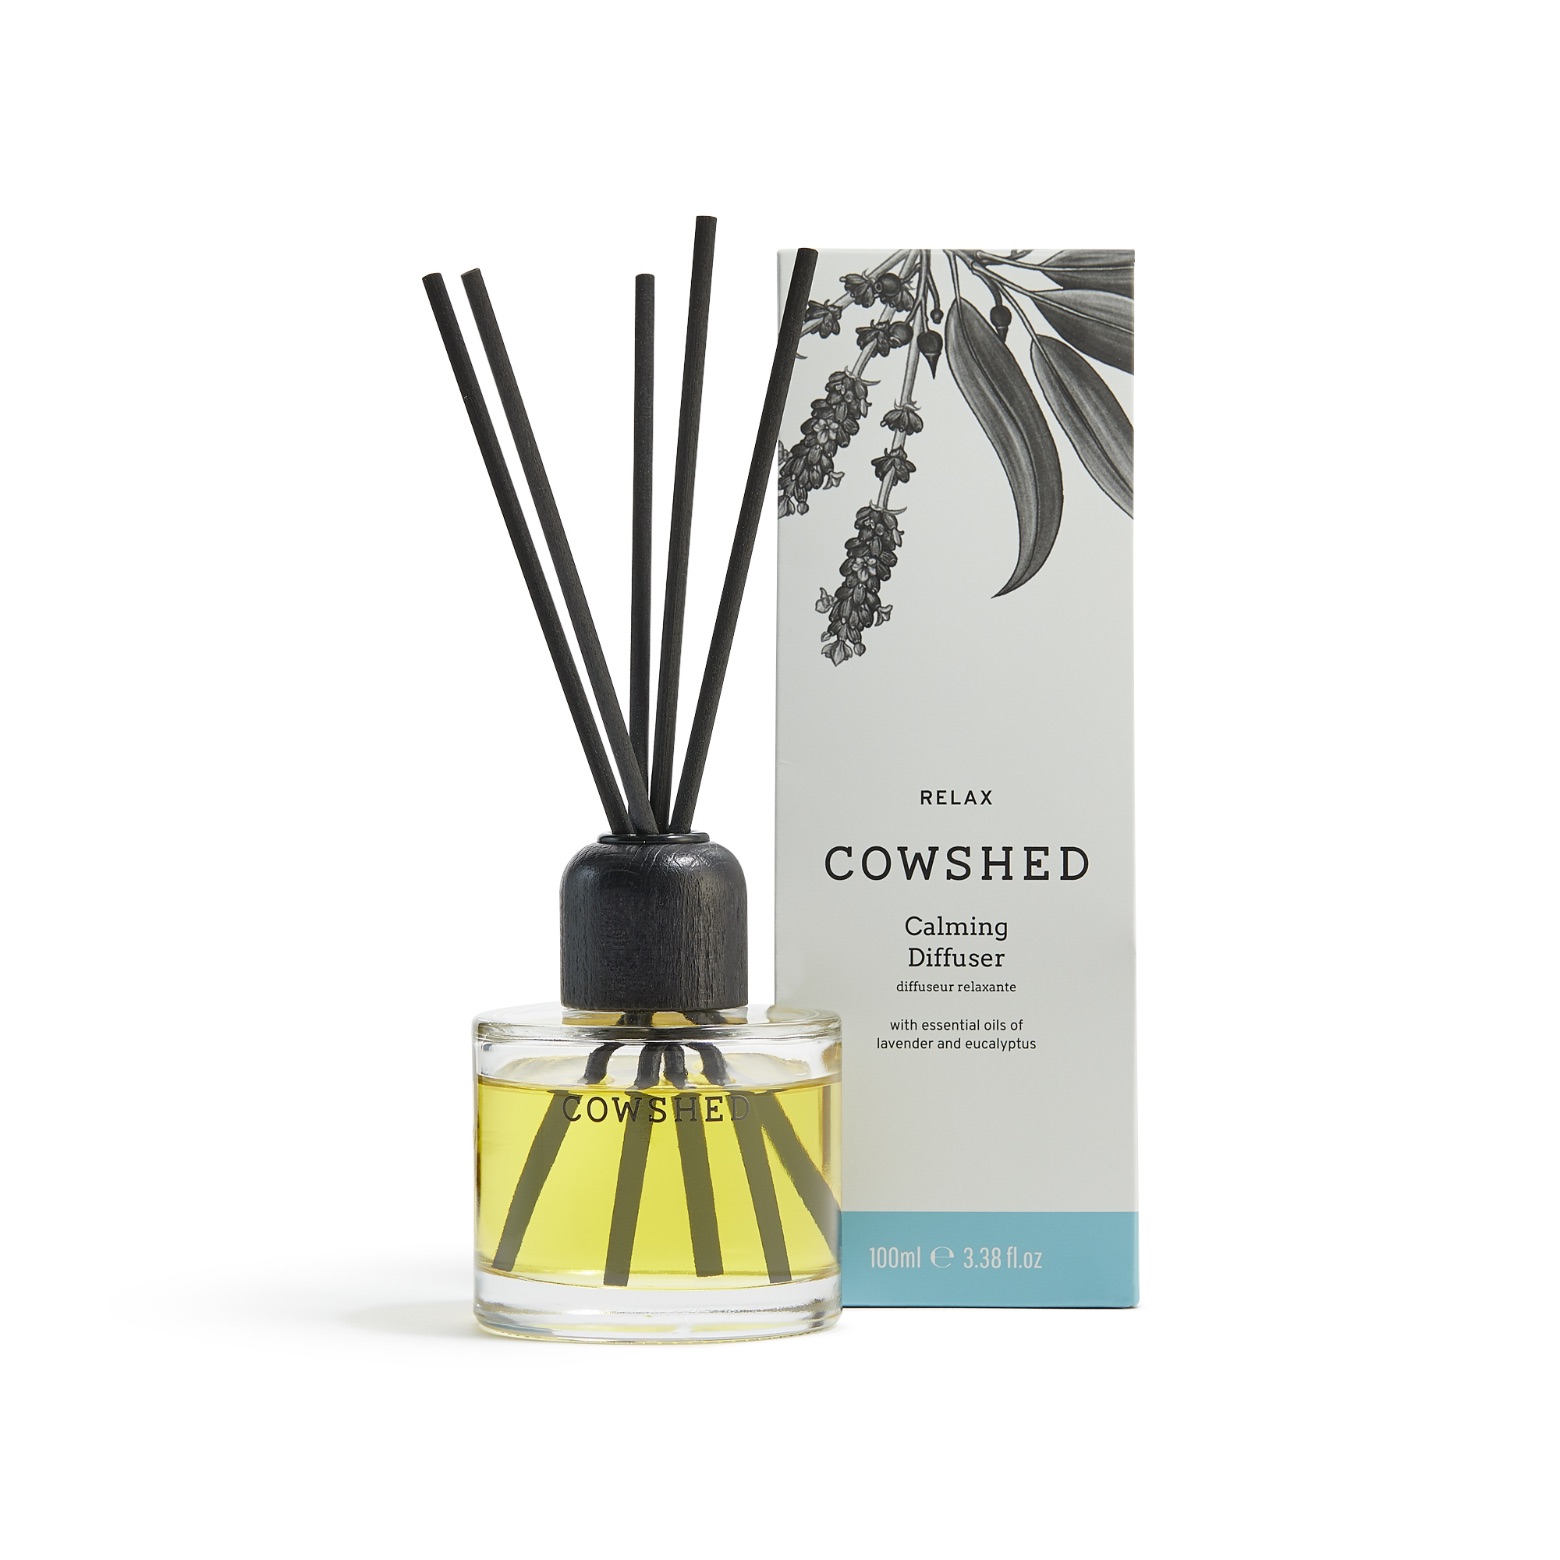 Cowshed RELAX Calming Diffuser 100ml